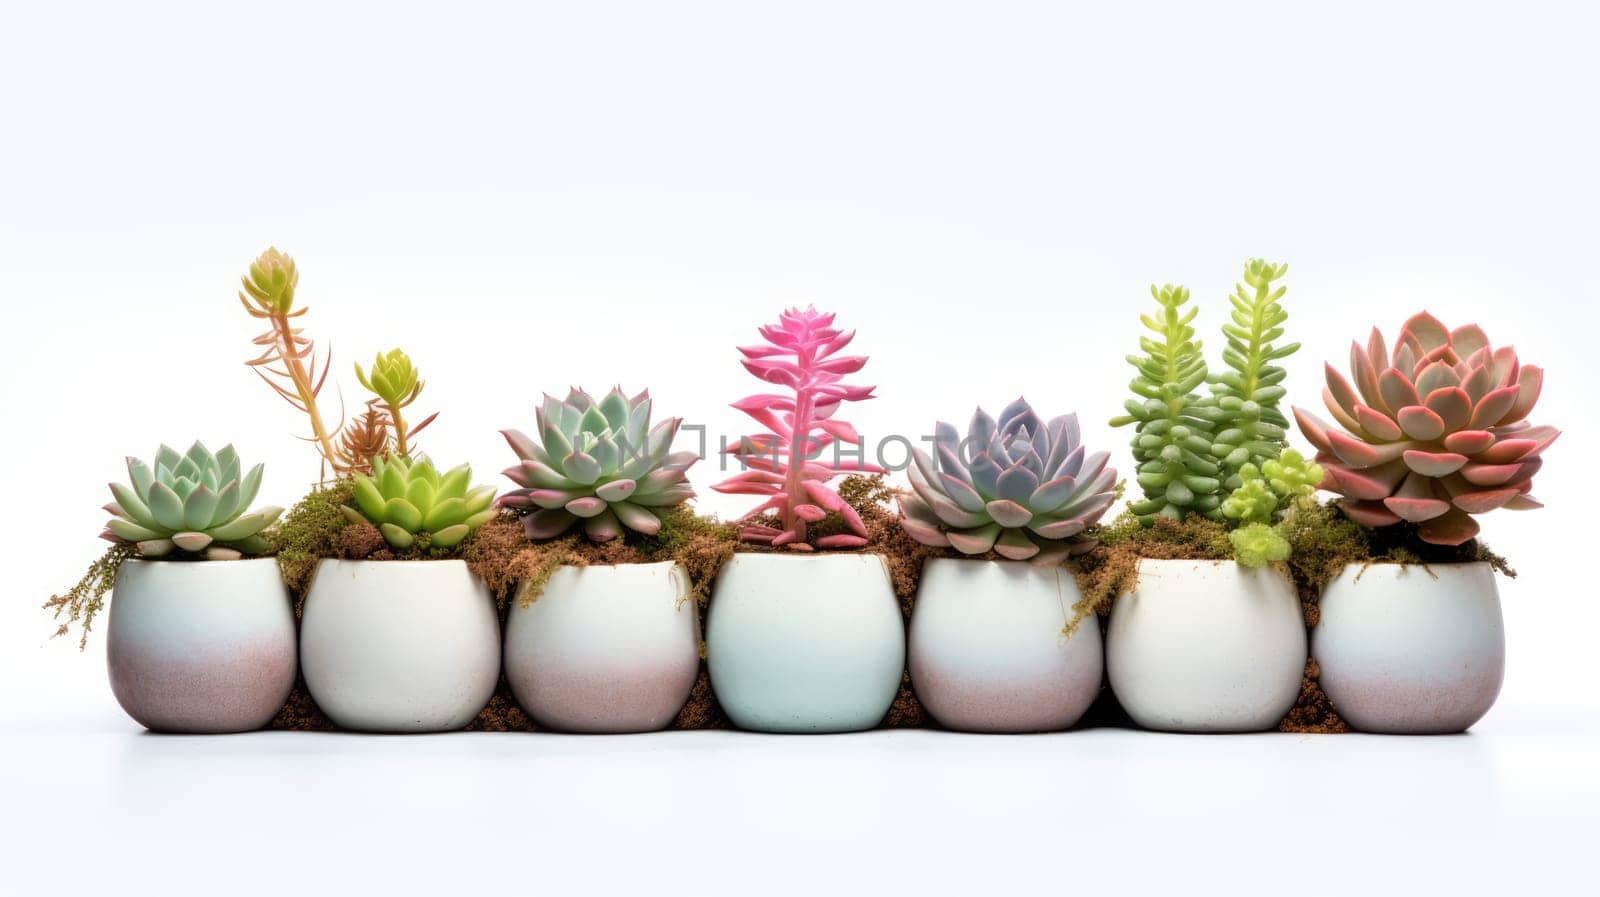 Collection of various cacti and juicy plants in various pots. Houseplants on a white background.